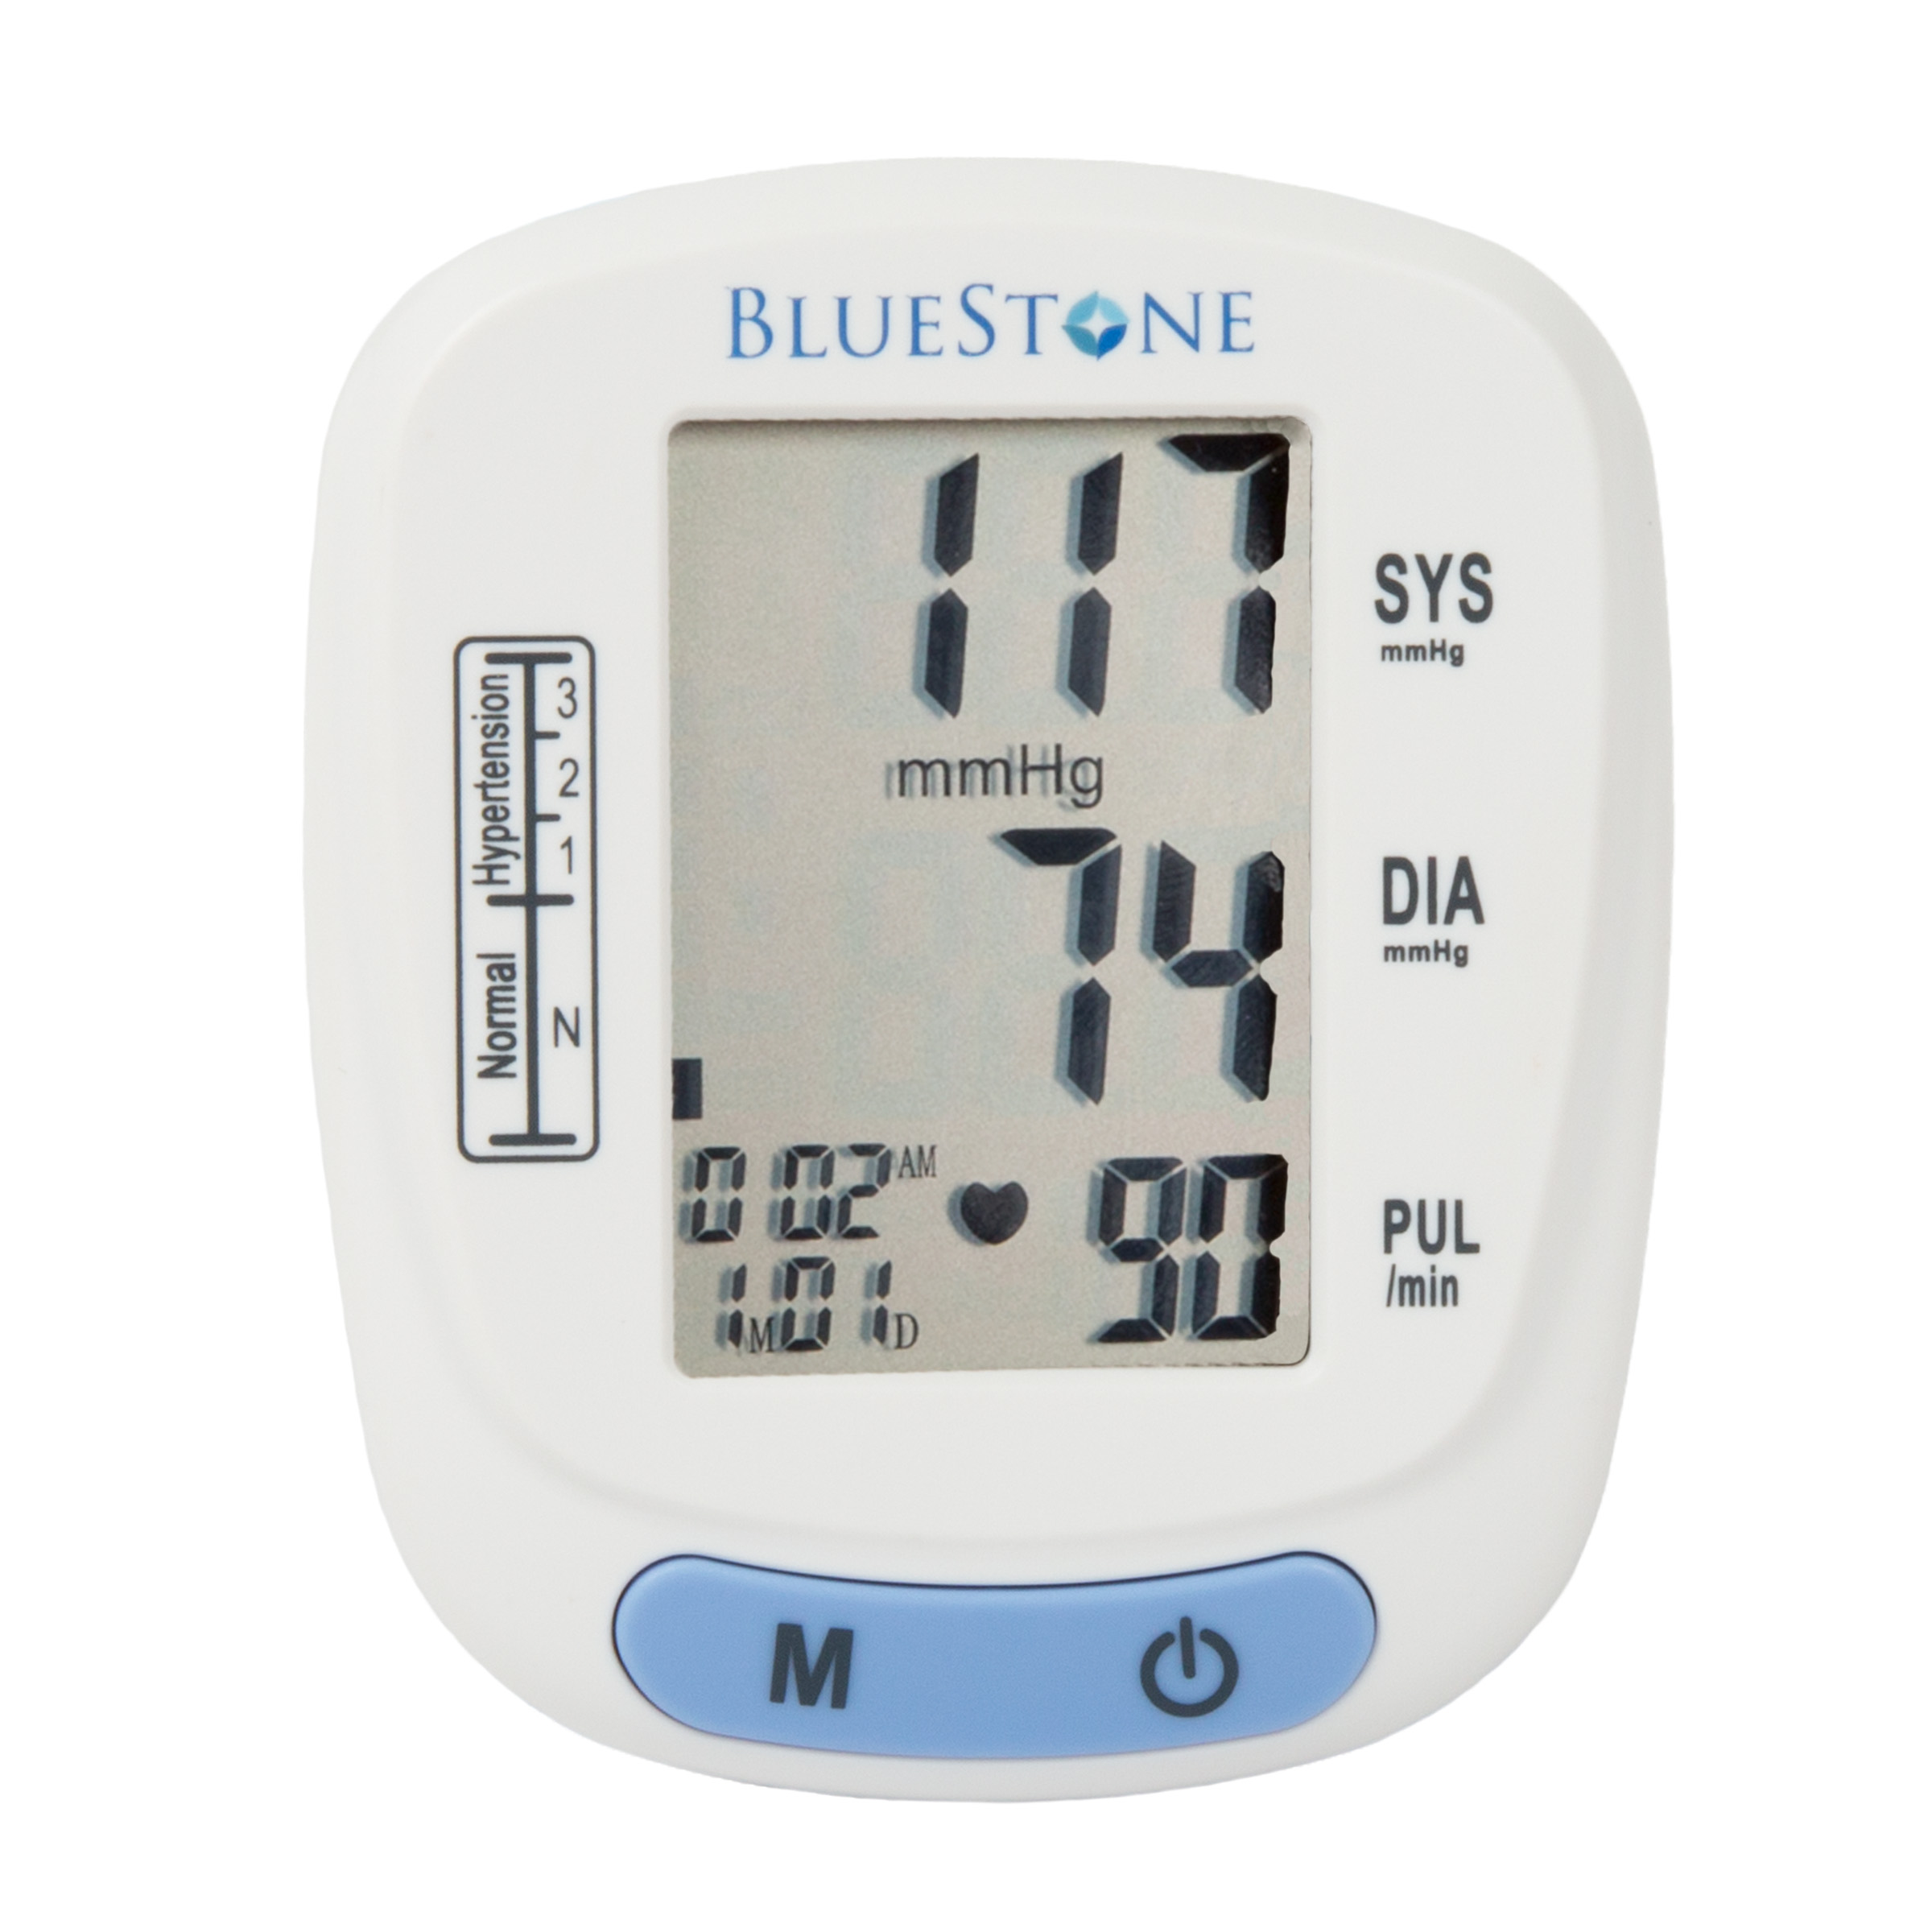 Blood Pressure Monitor With Heart Rate - Automatic Wrist Cuff Blood Pressure Machine With LCD Display Memory and Carrying Case by Bluestone - image 5 of 7